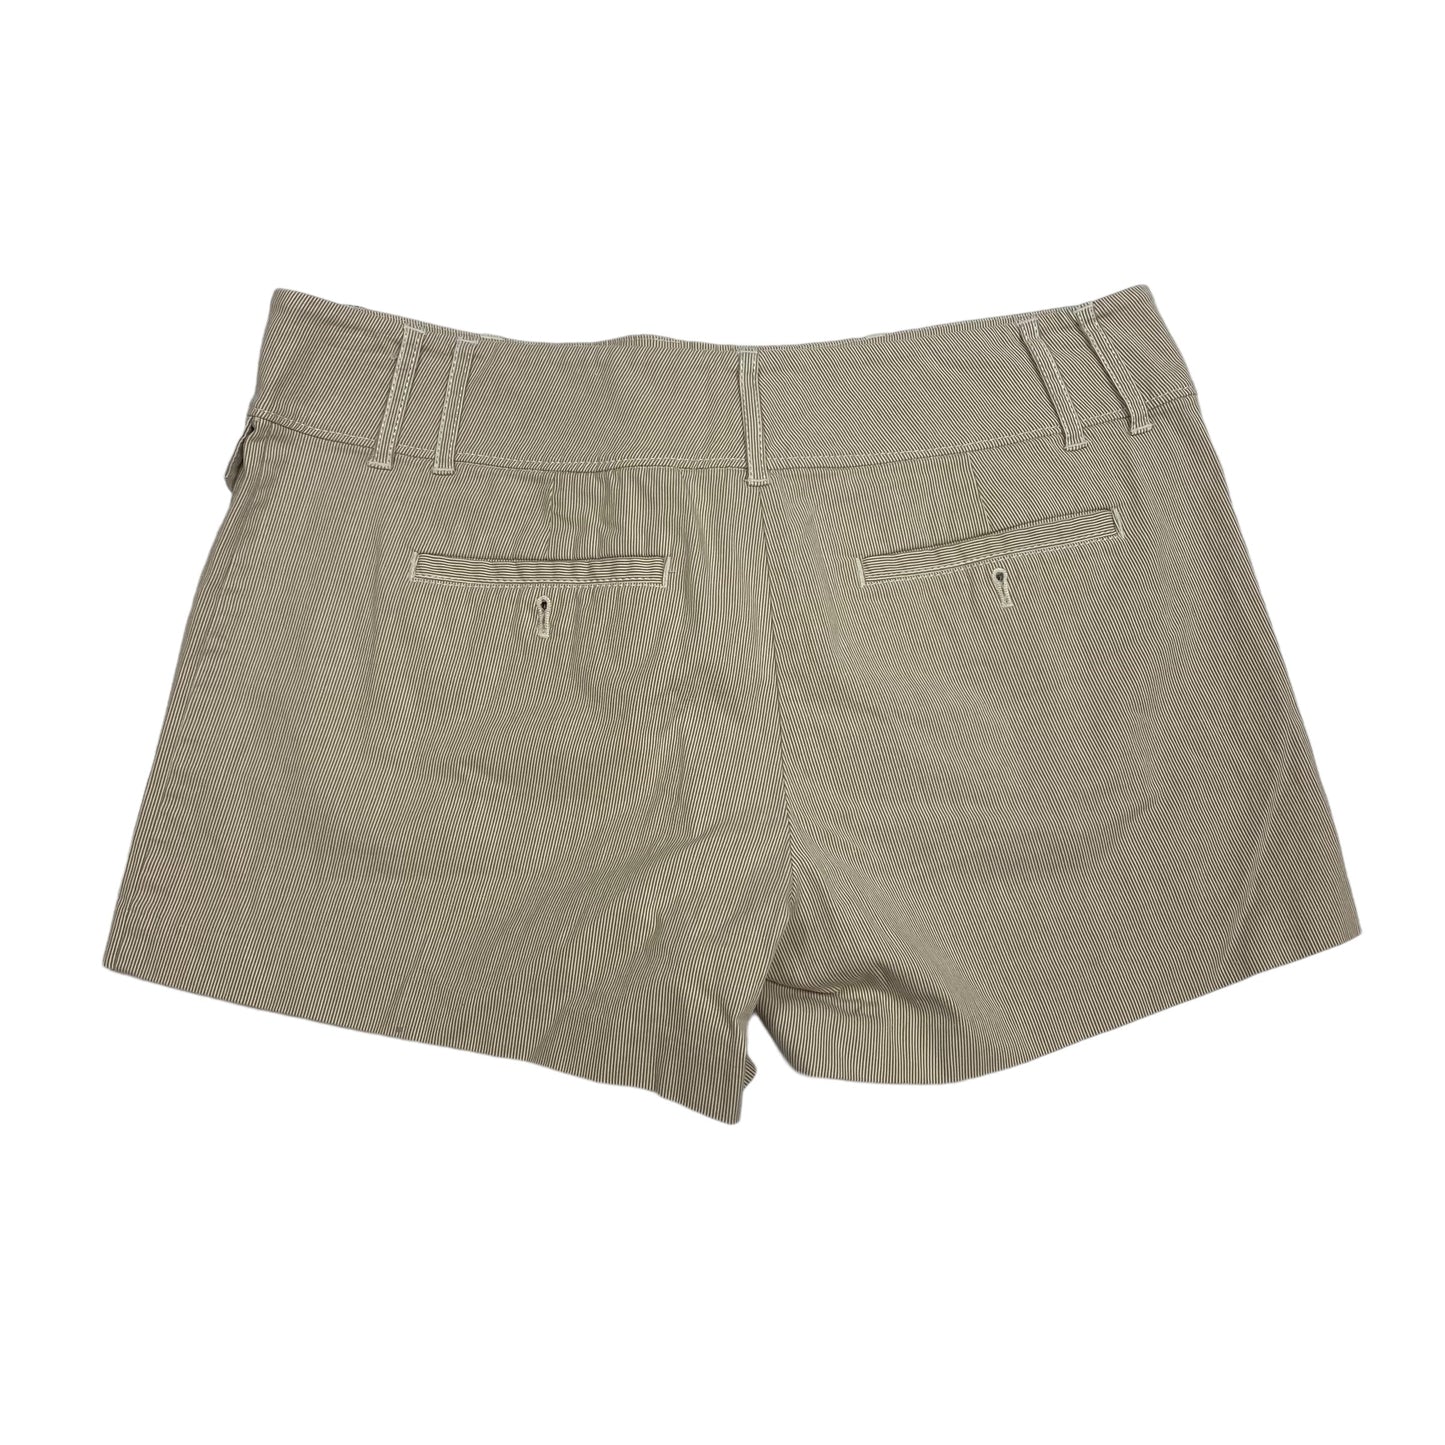 Tan Shorts New York And Co, Size 6